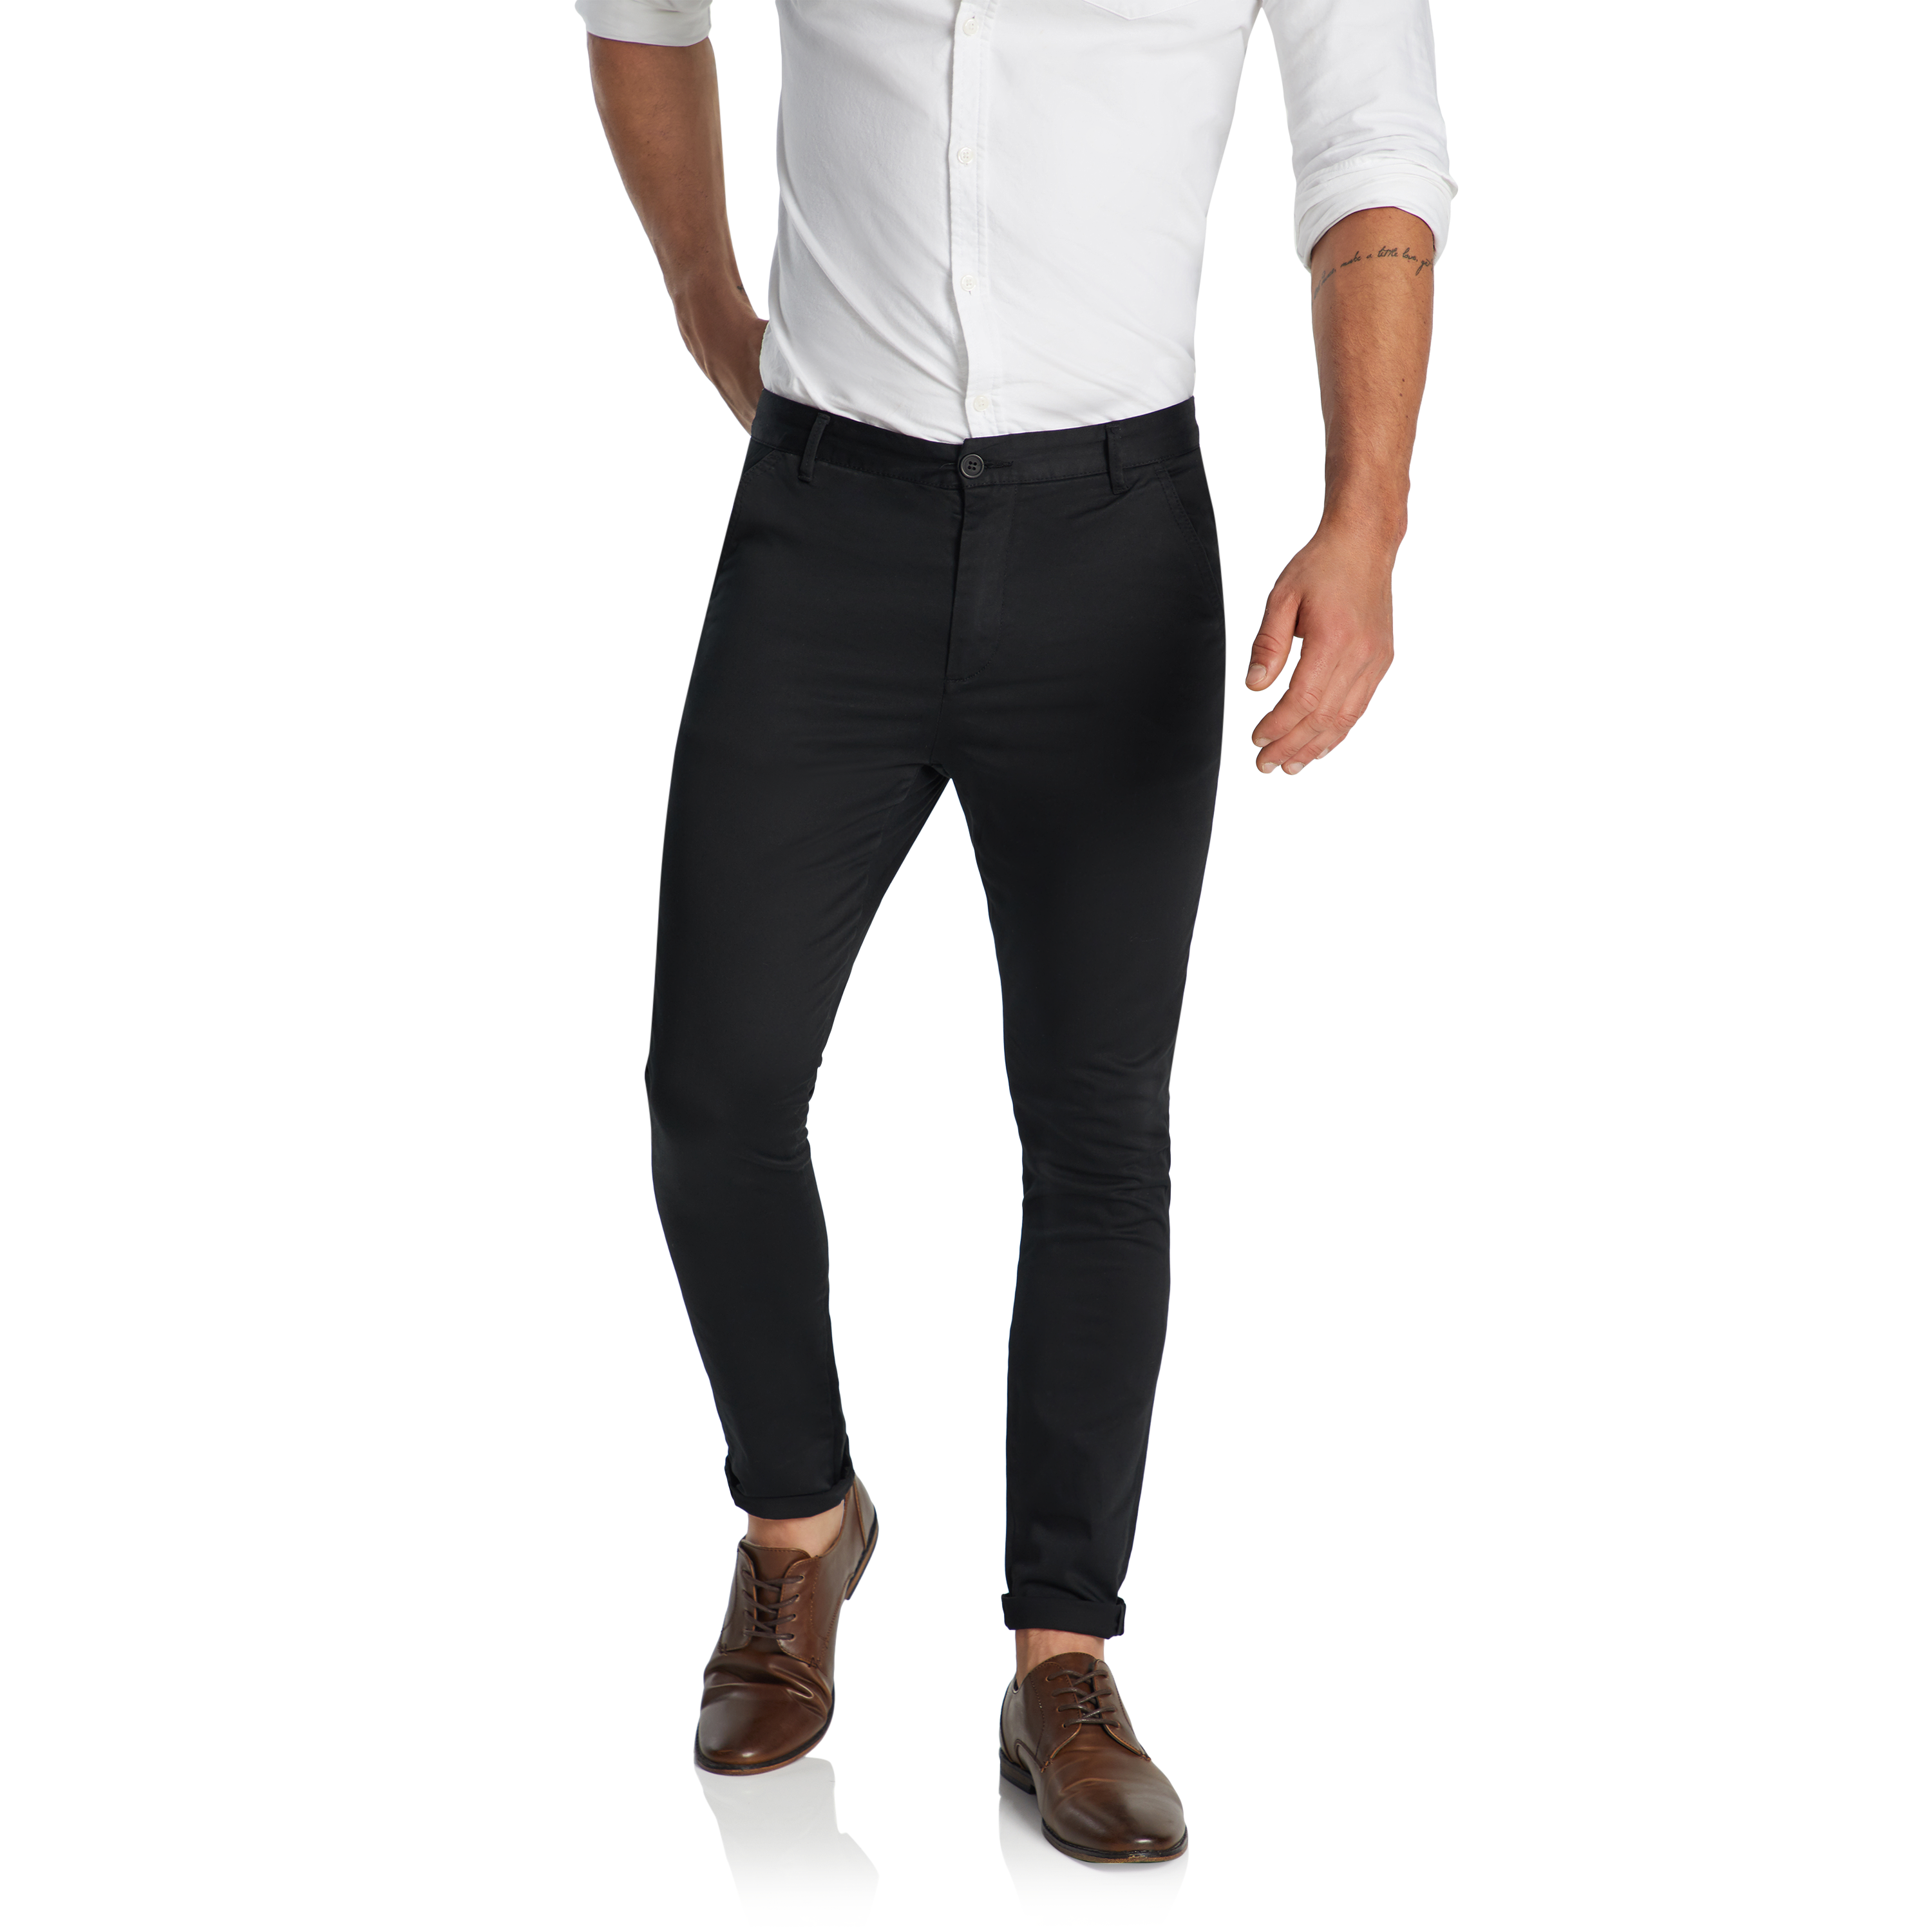 How to Wear Chinos for Men  Chino Outfit Ideas  GAZMAN